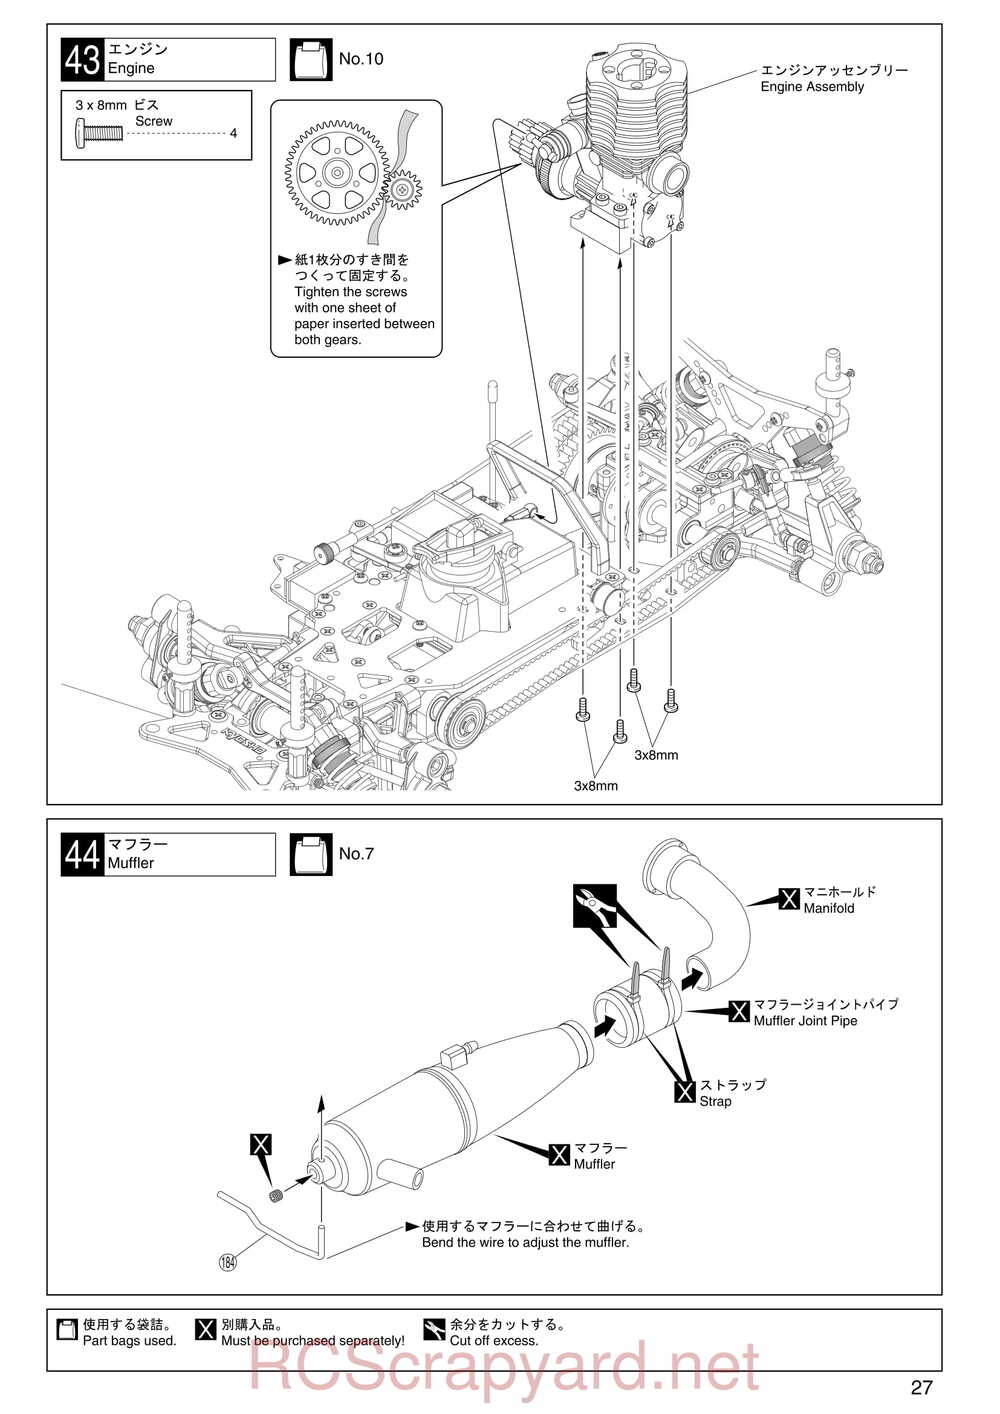 Kyosho - 31257 - V-One RRR Rubber - Manual - Page 27